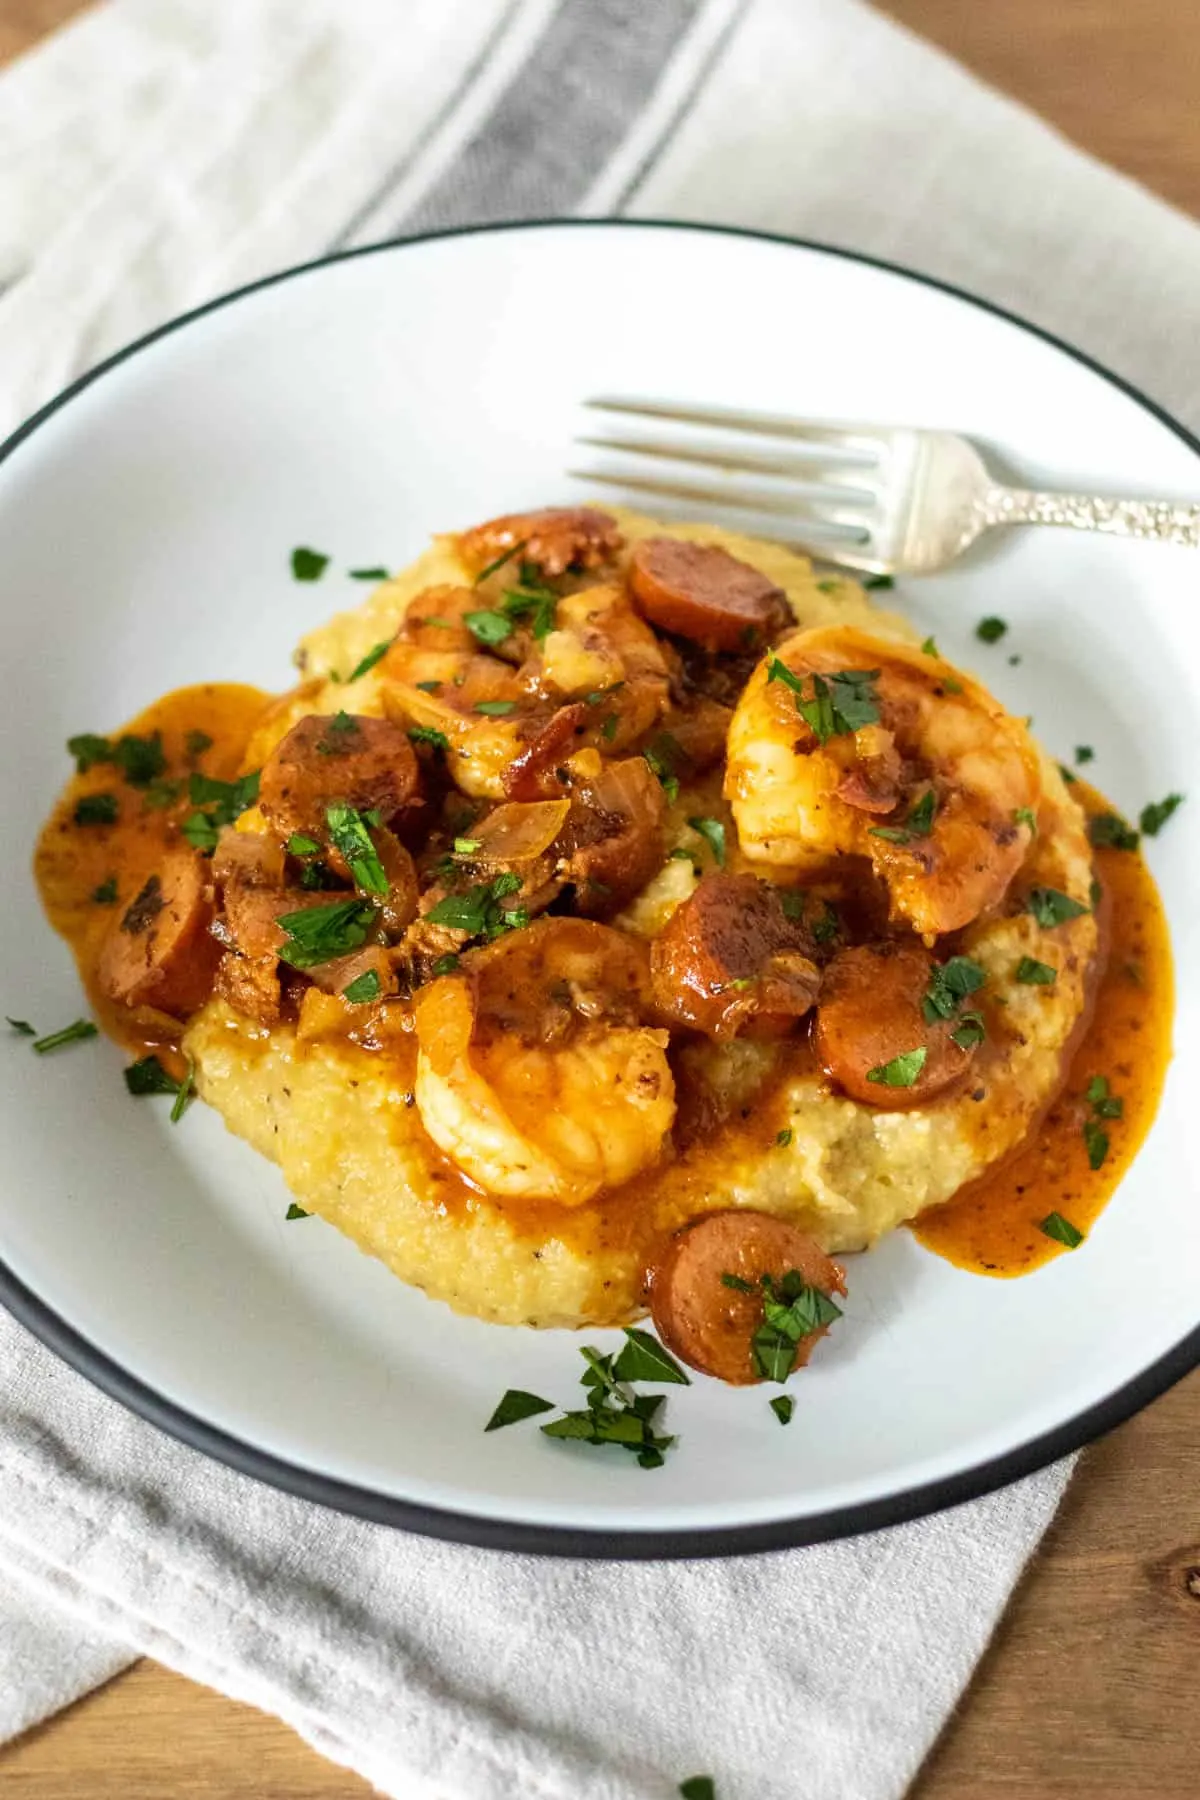 Overhead of shrimp mixture over grits on plate with fork.